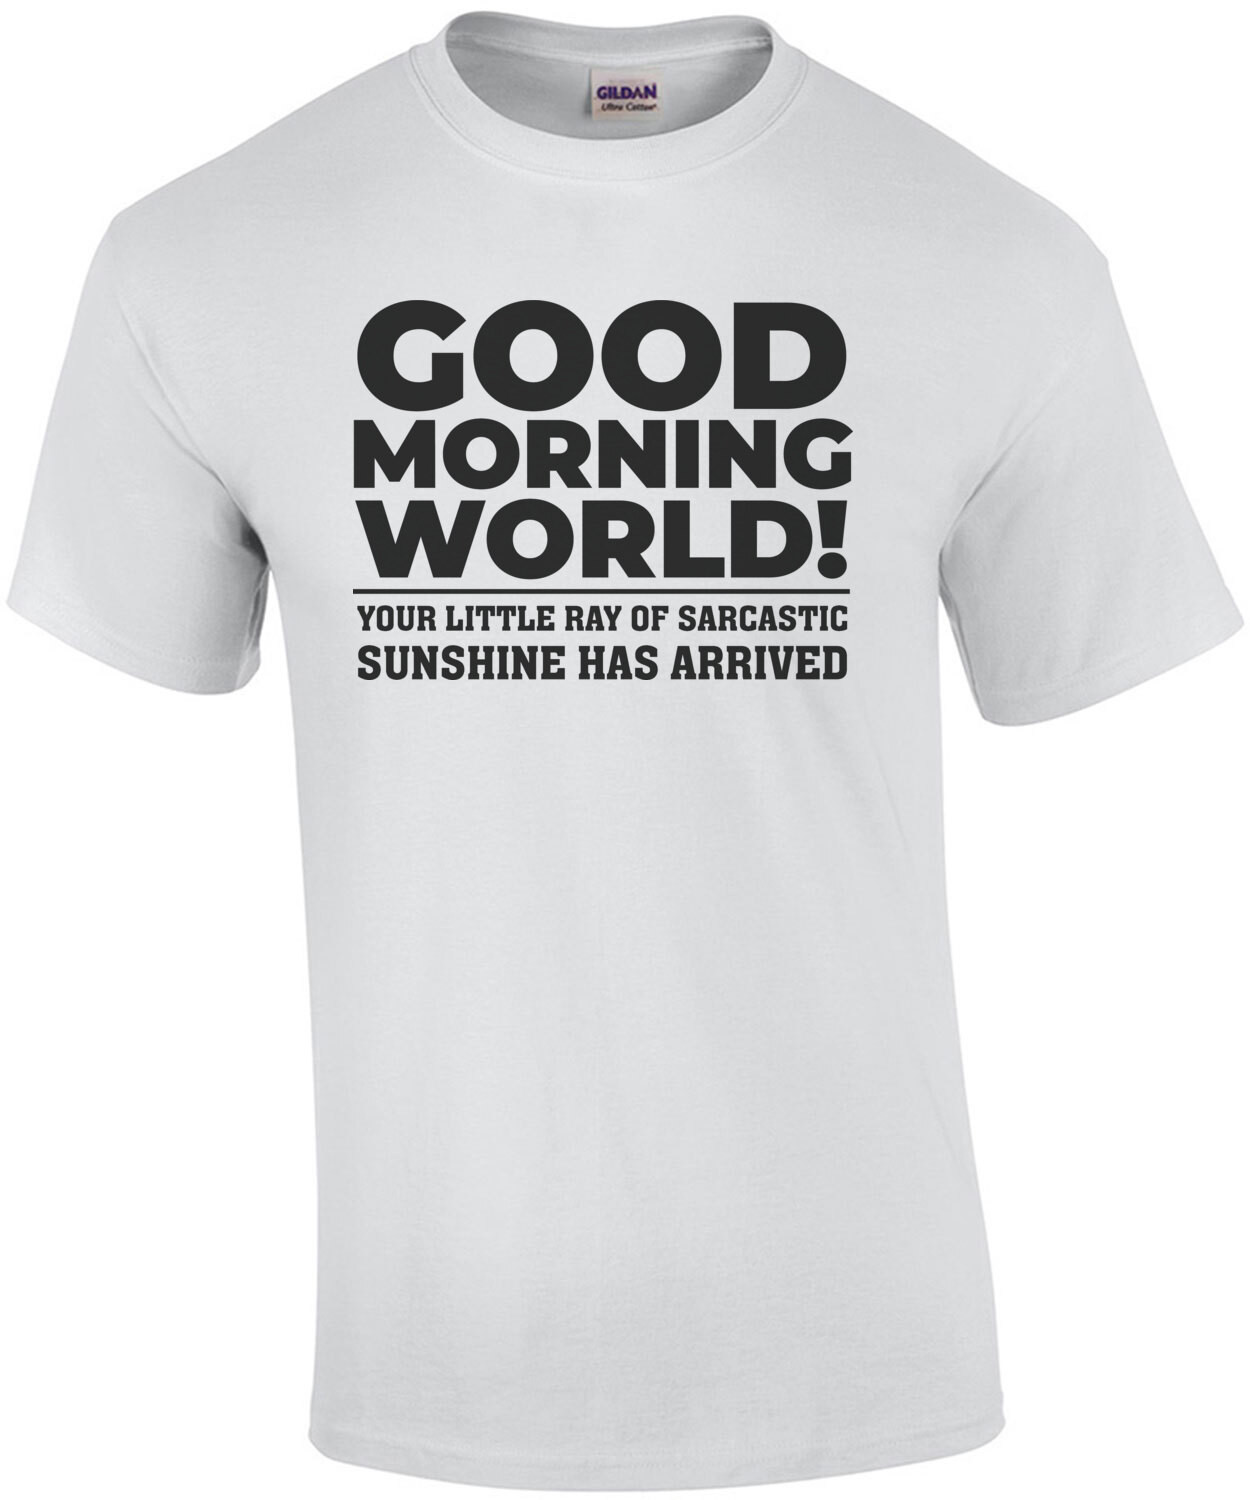 Good morning world! Your little ray of sarcastic sunshine has arrived - funny sarcastic t-shirt